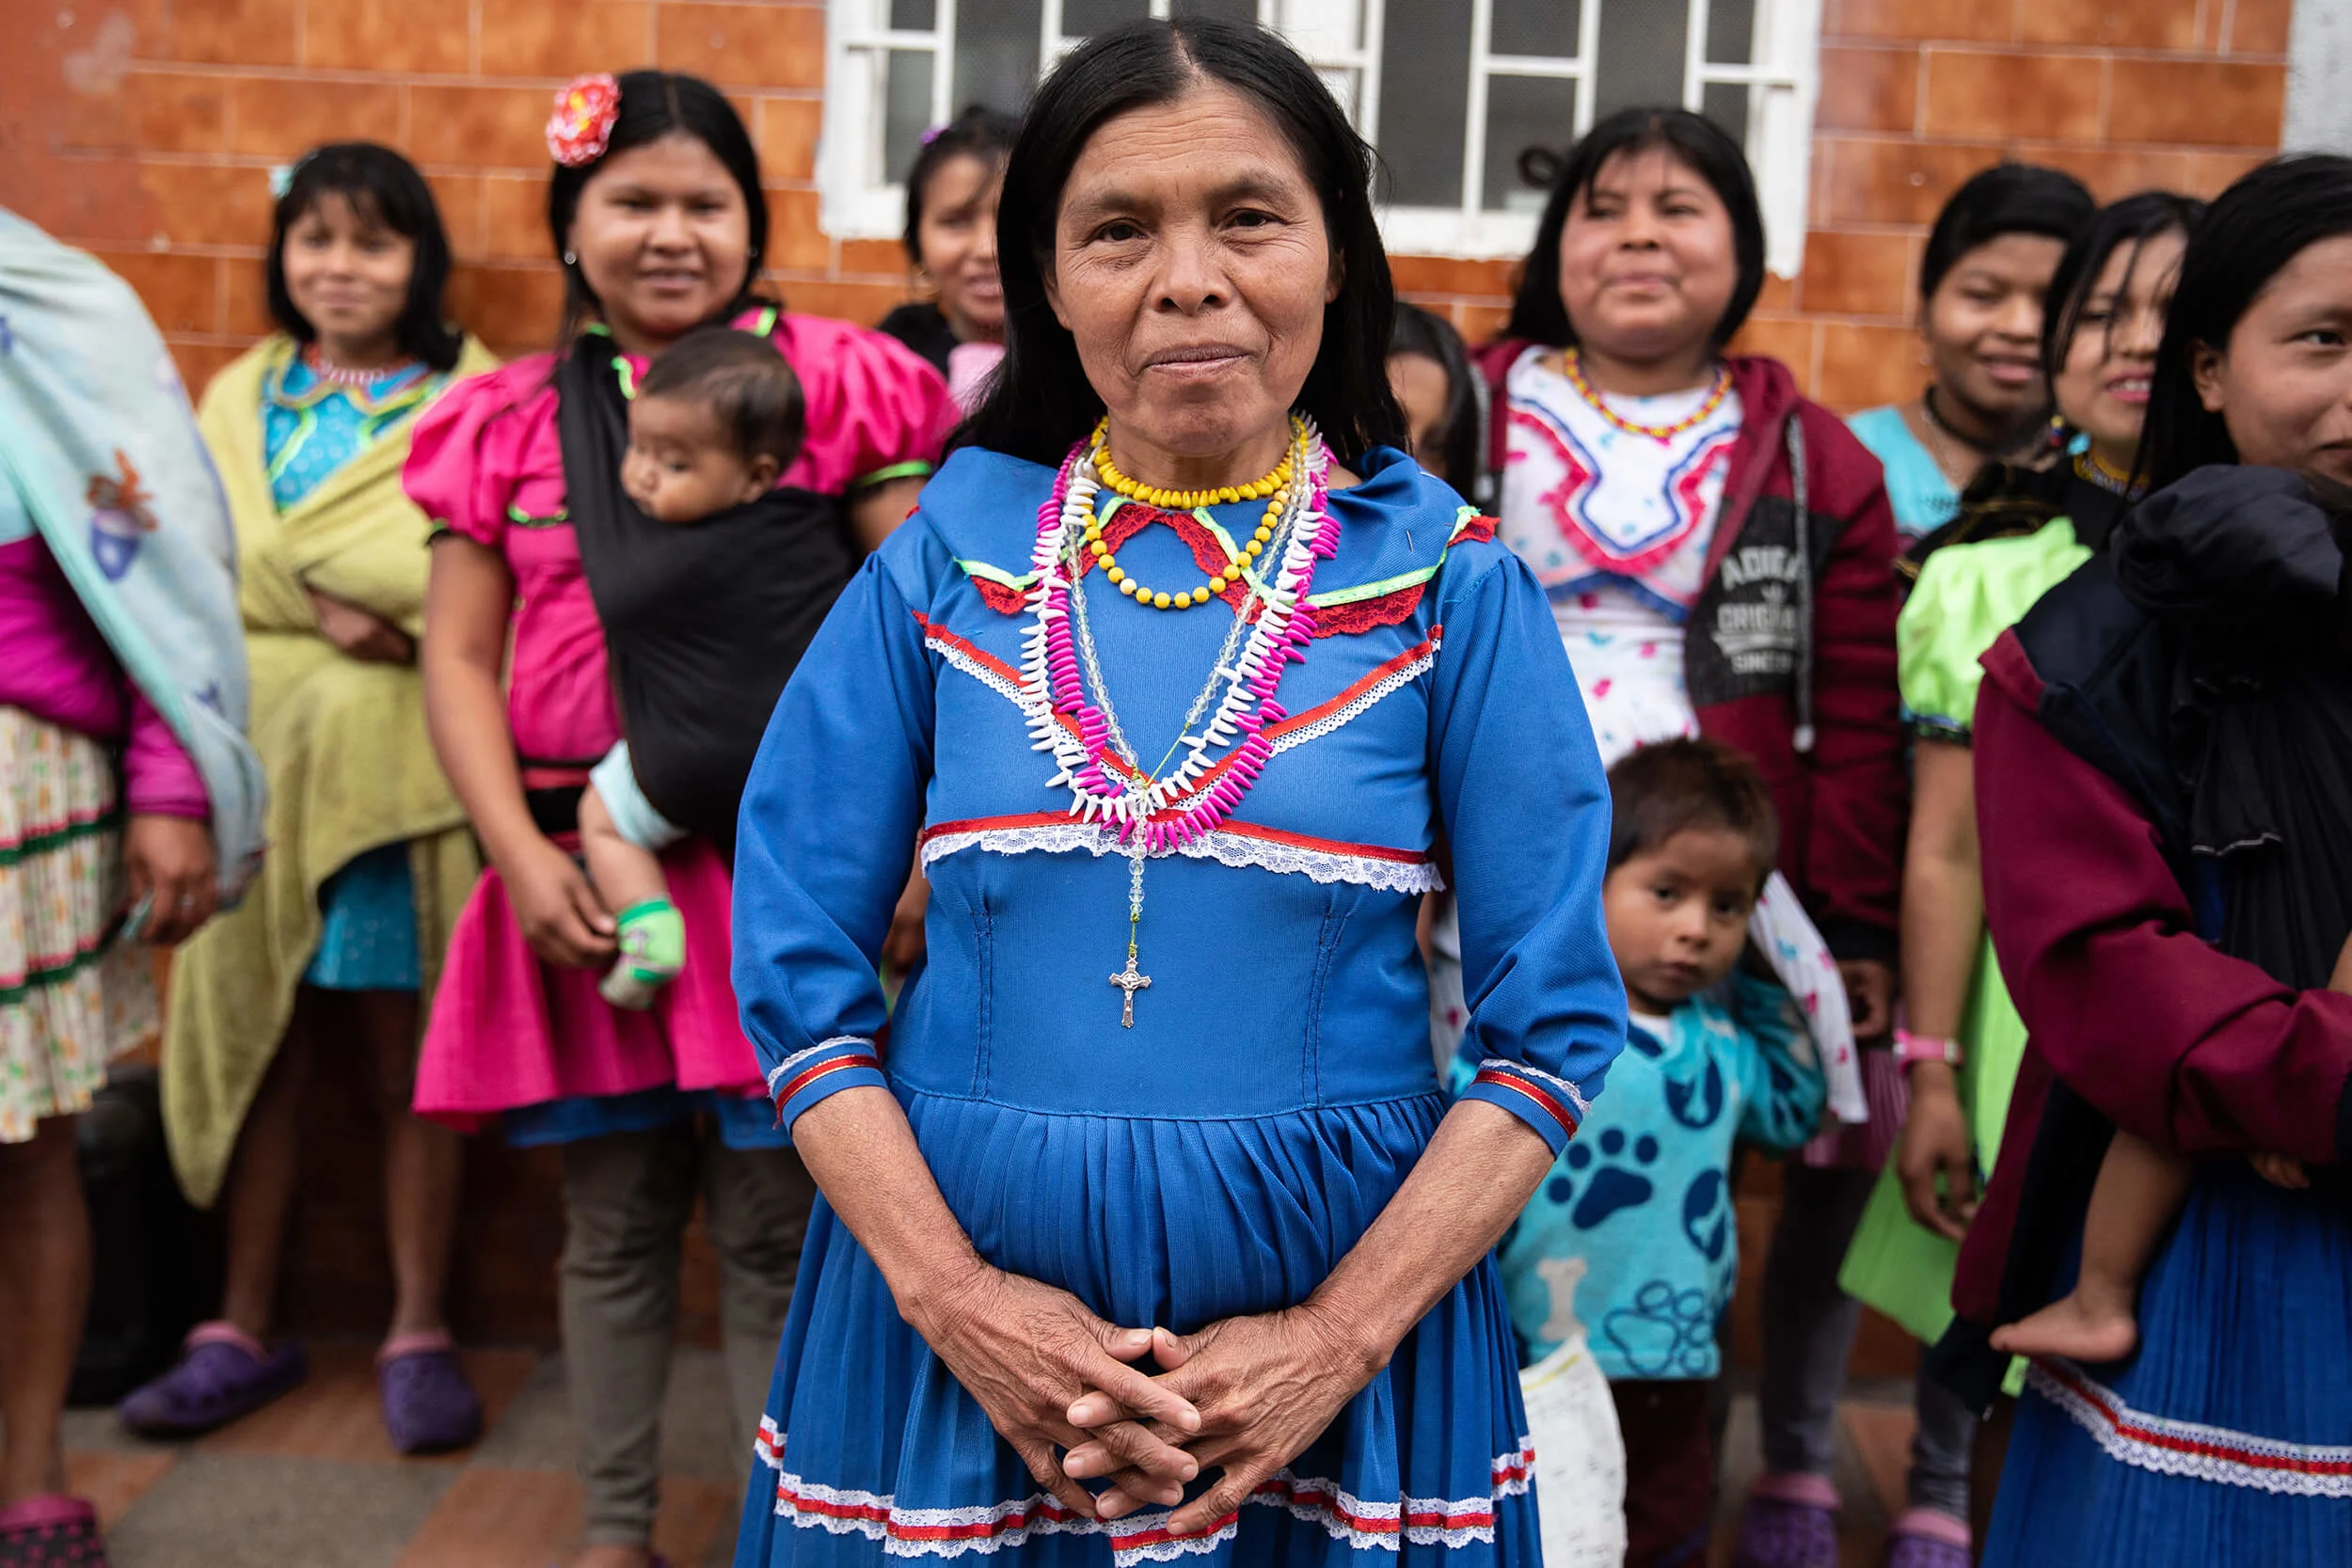 Left: A swaddled child sleeps on his concerned mother’s chest. The murder in the community left everyone tense and on edge. Right: Embera women assemble outside of their building before a meeting to discuss the future of the community